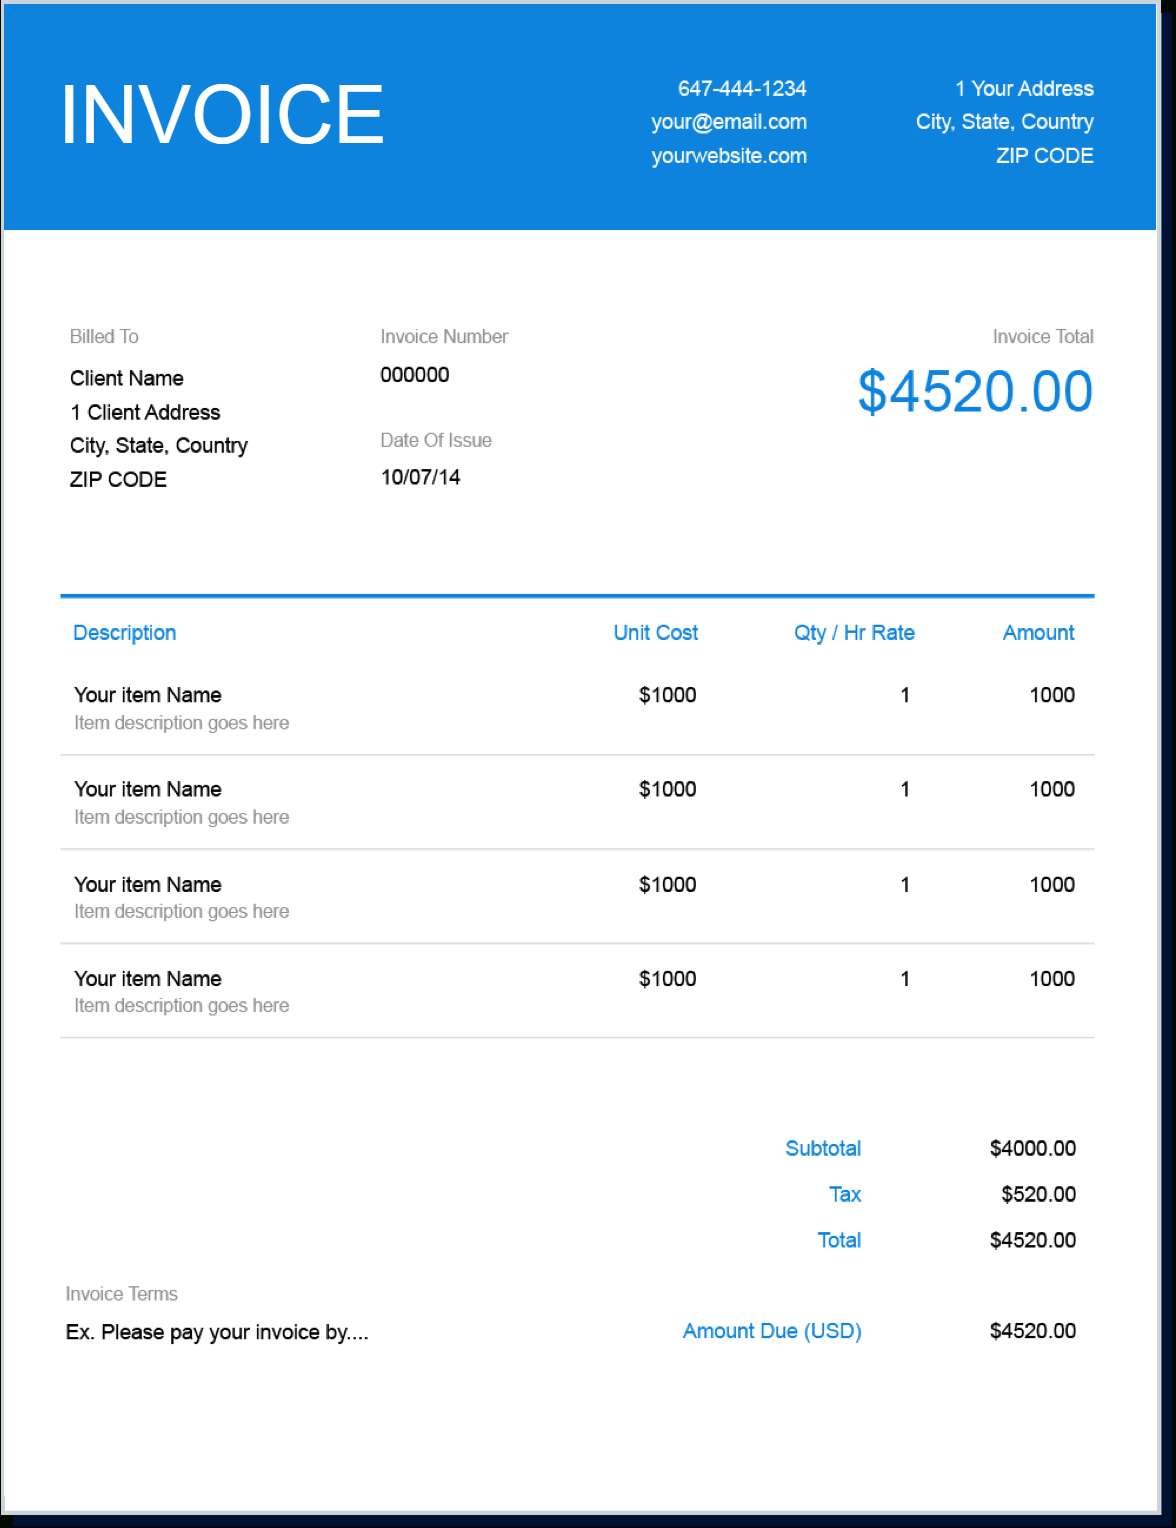 Invoice Template | Create And Send Free Invoices Instantly In Web Design Invoice Template Word